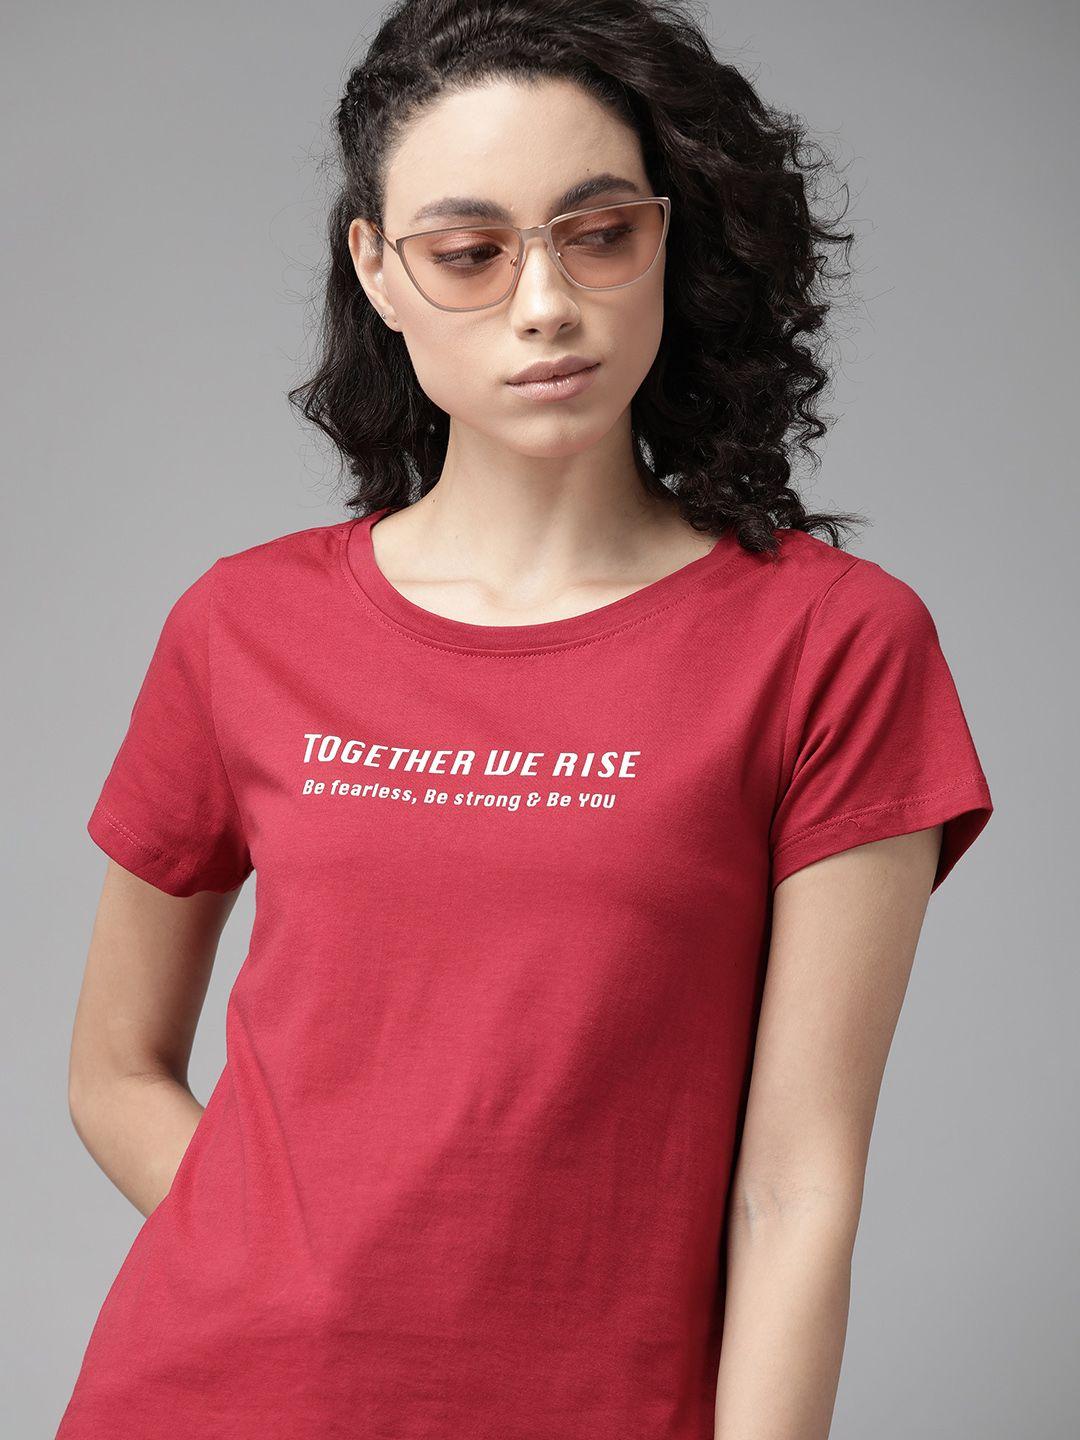 The Roadster Lifestyle Co Women Red Printed Round Neck Pure Cotton T-shirt